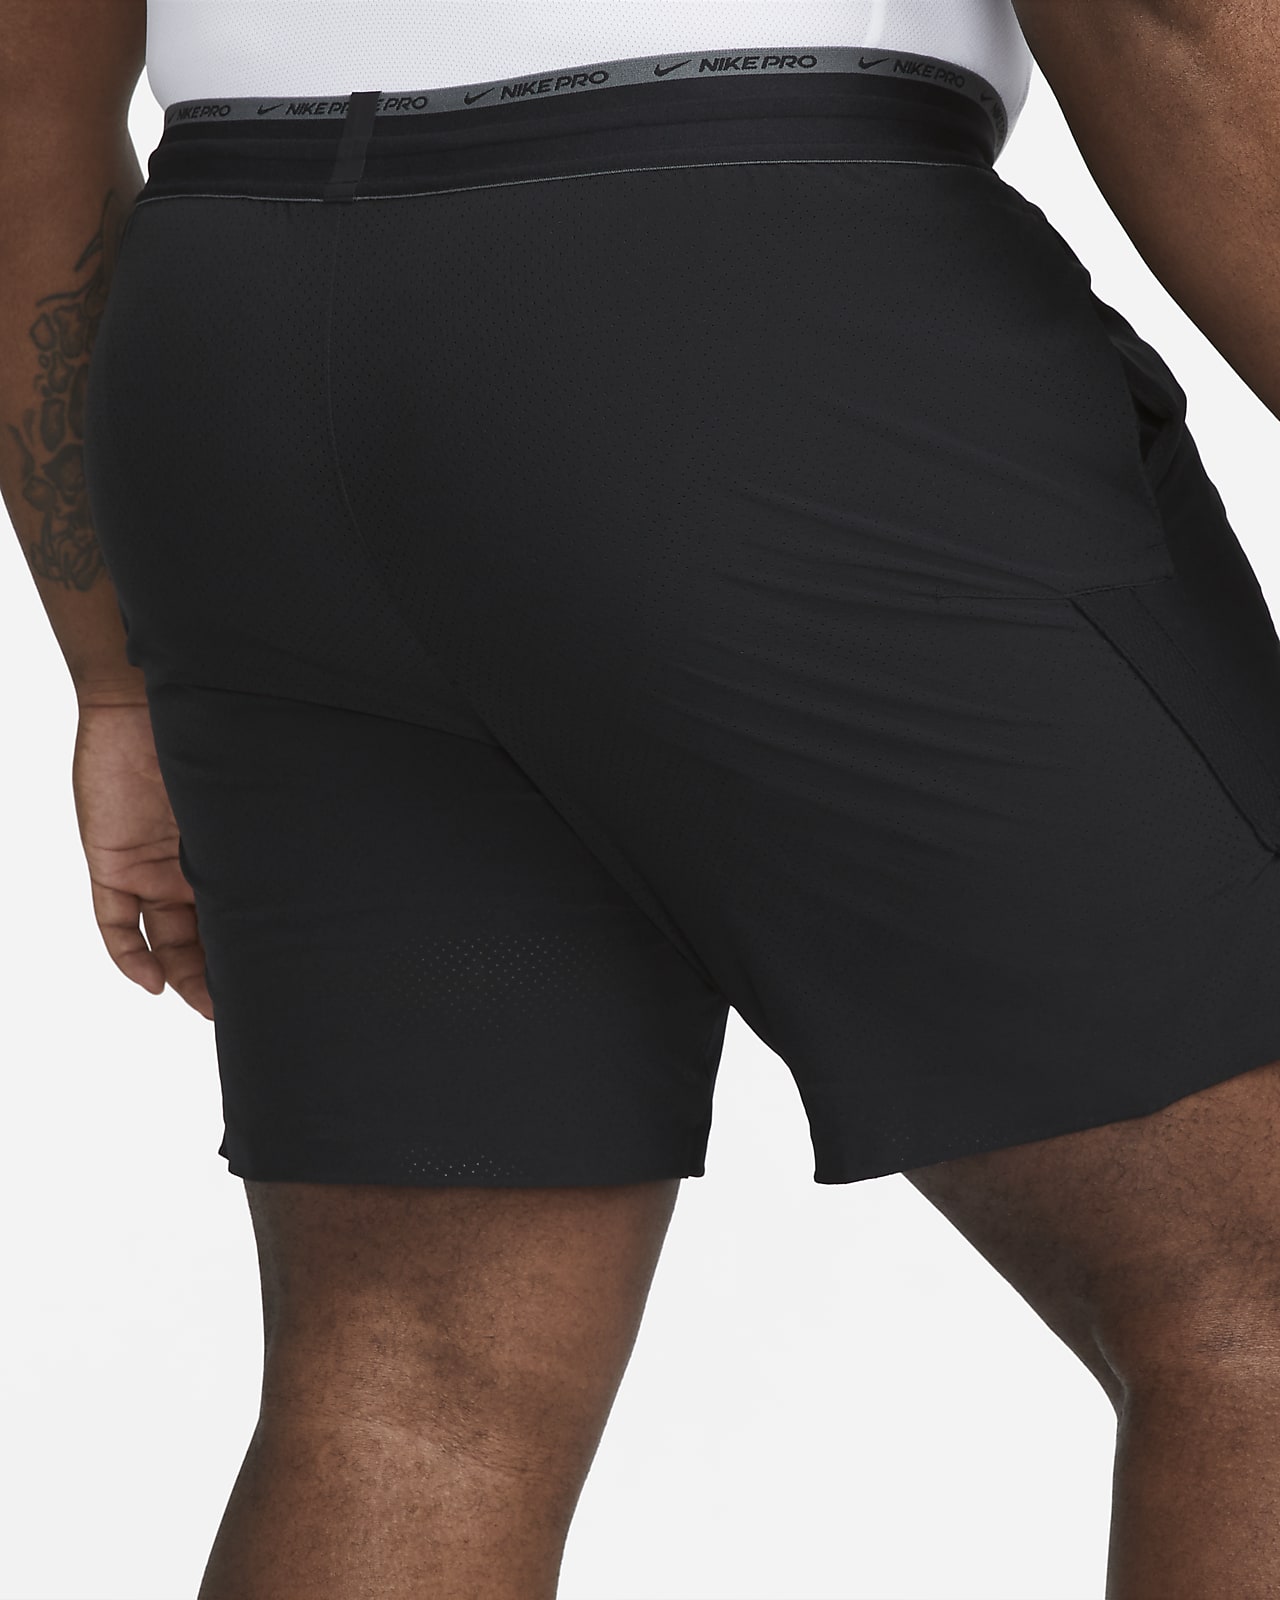 Nike Pro Training 3 inch shorts with mesh inserts in black